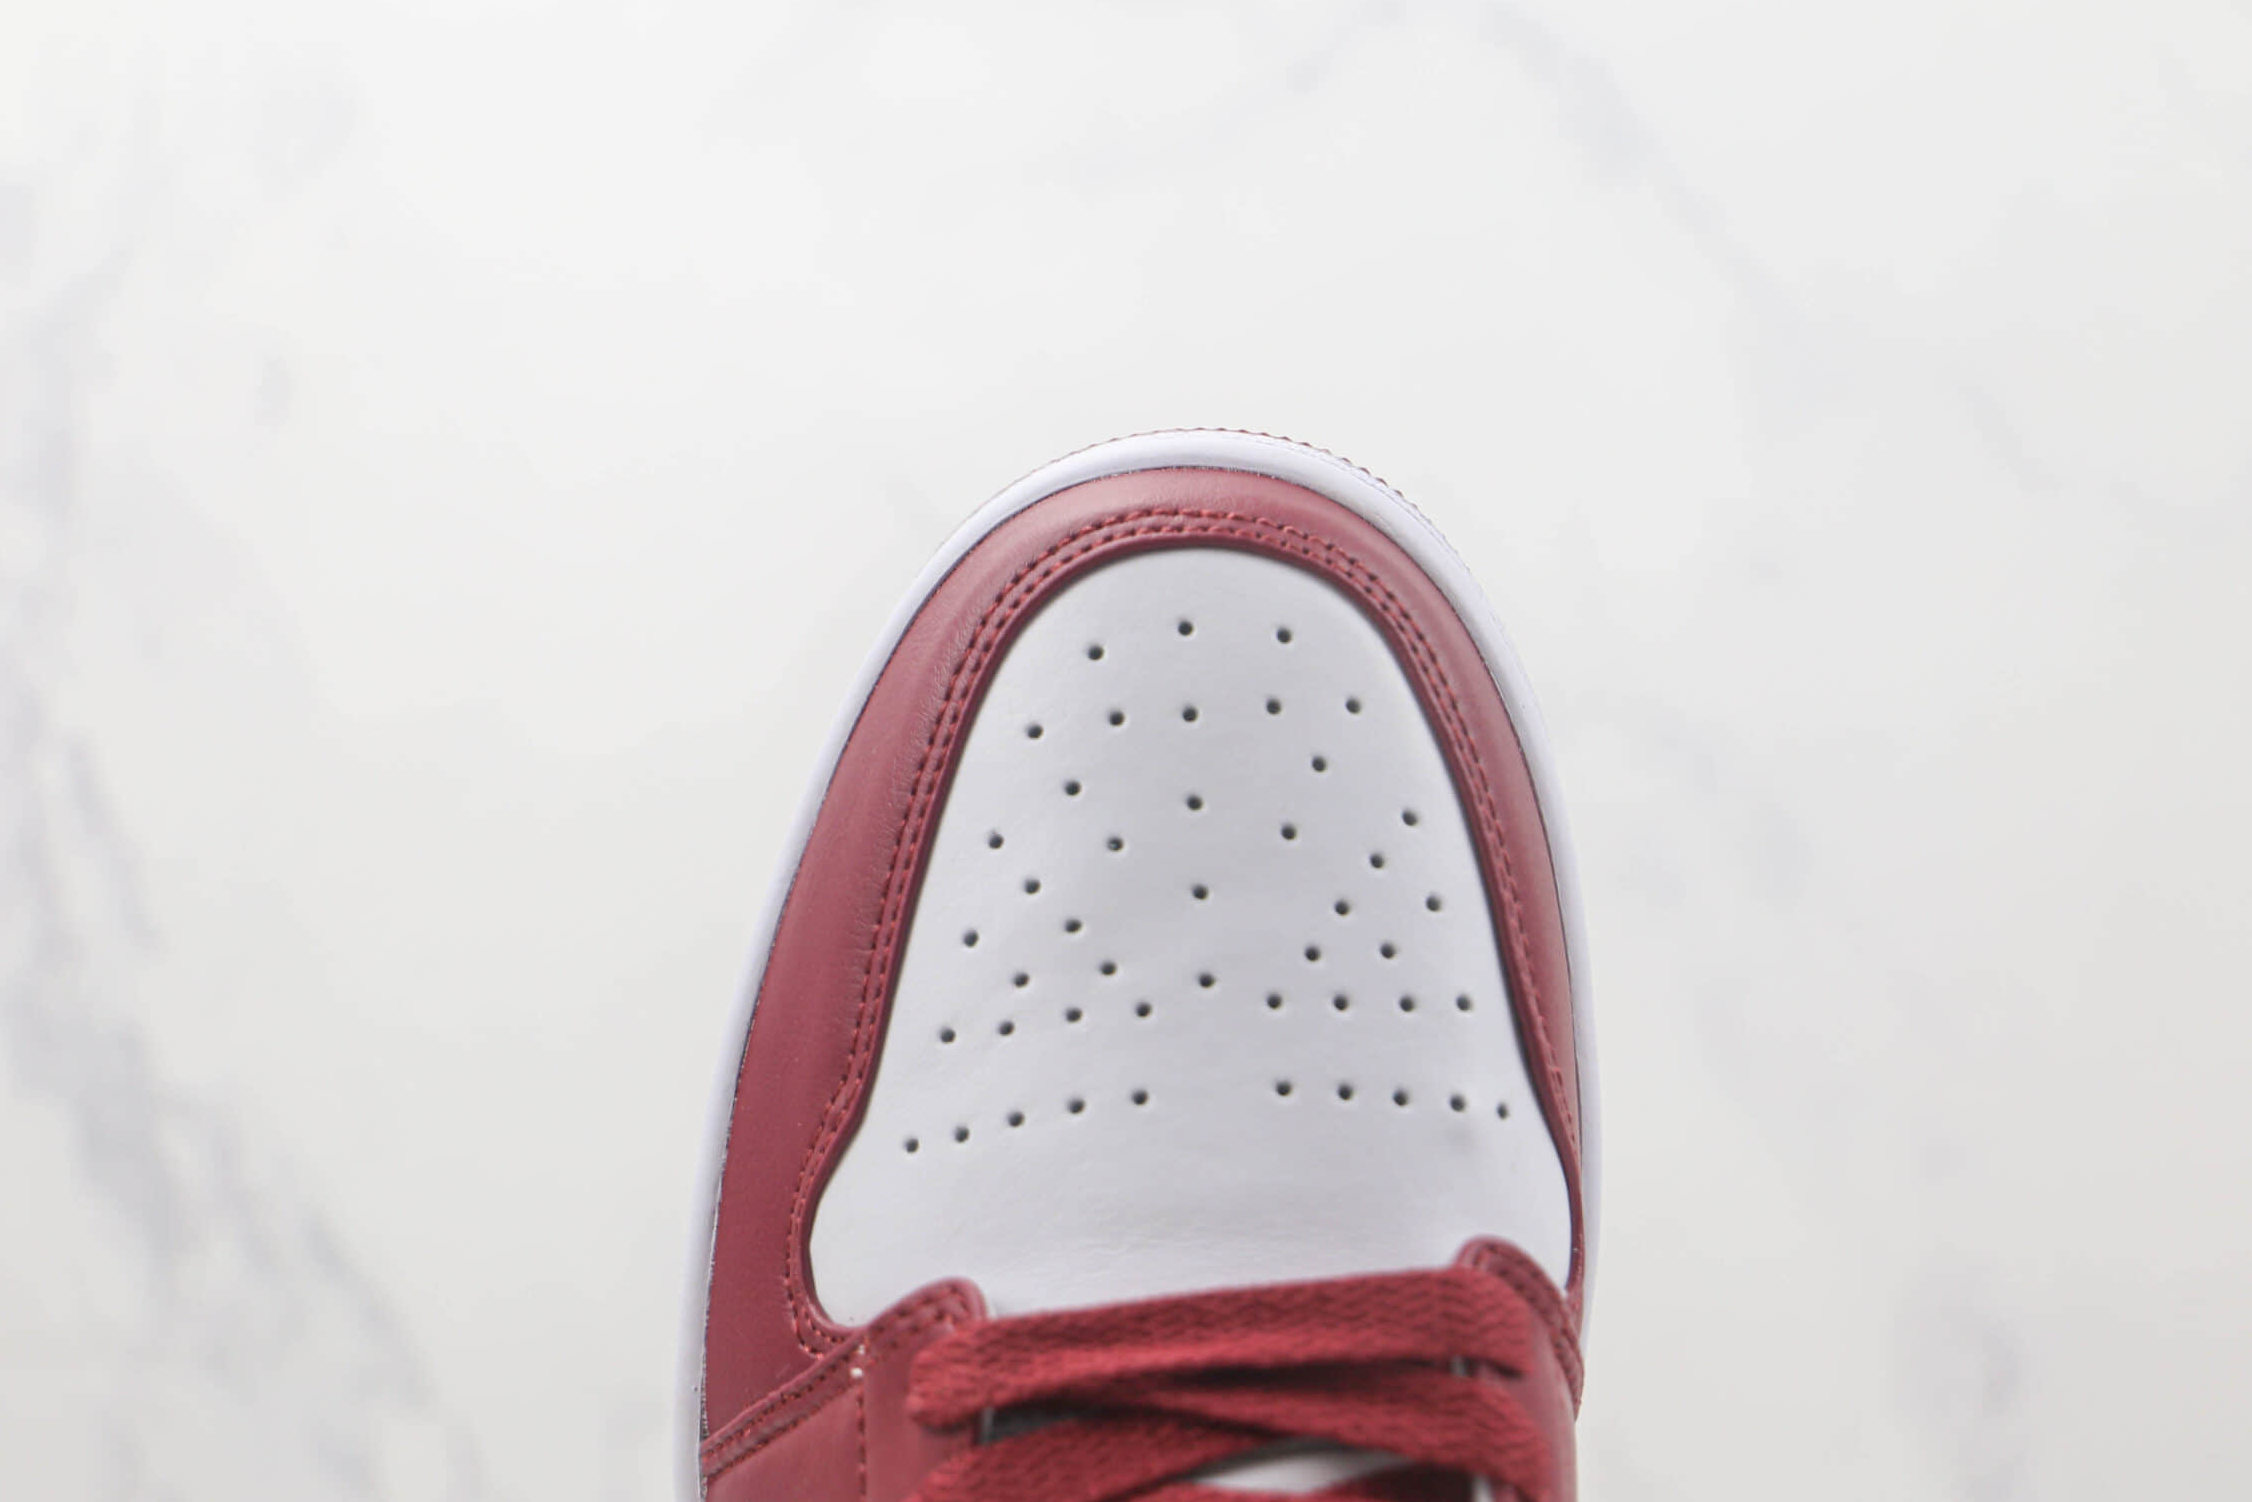 Air Jordan 1 Low 'Cherrywood Red' 553558-615 - Classic Style with Vibrant Red Accents